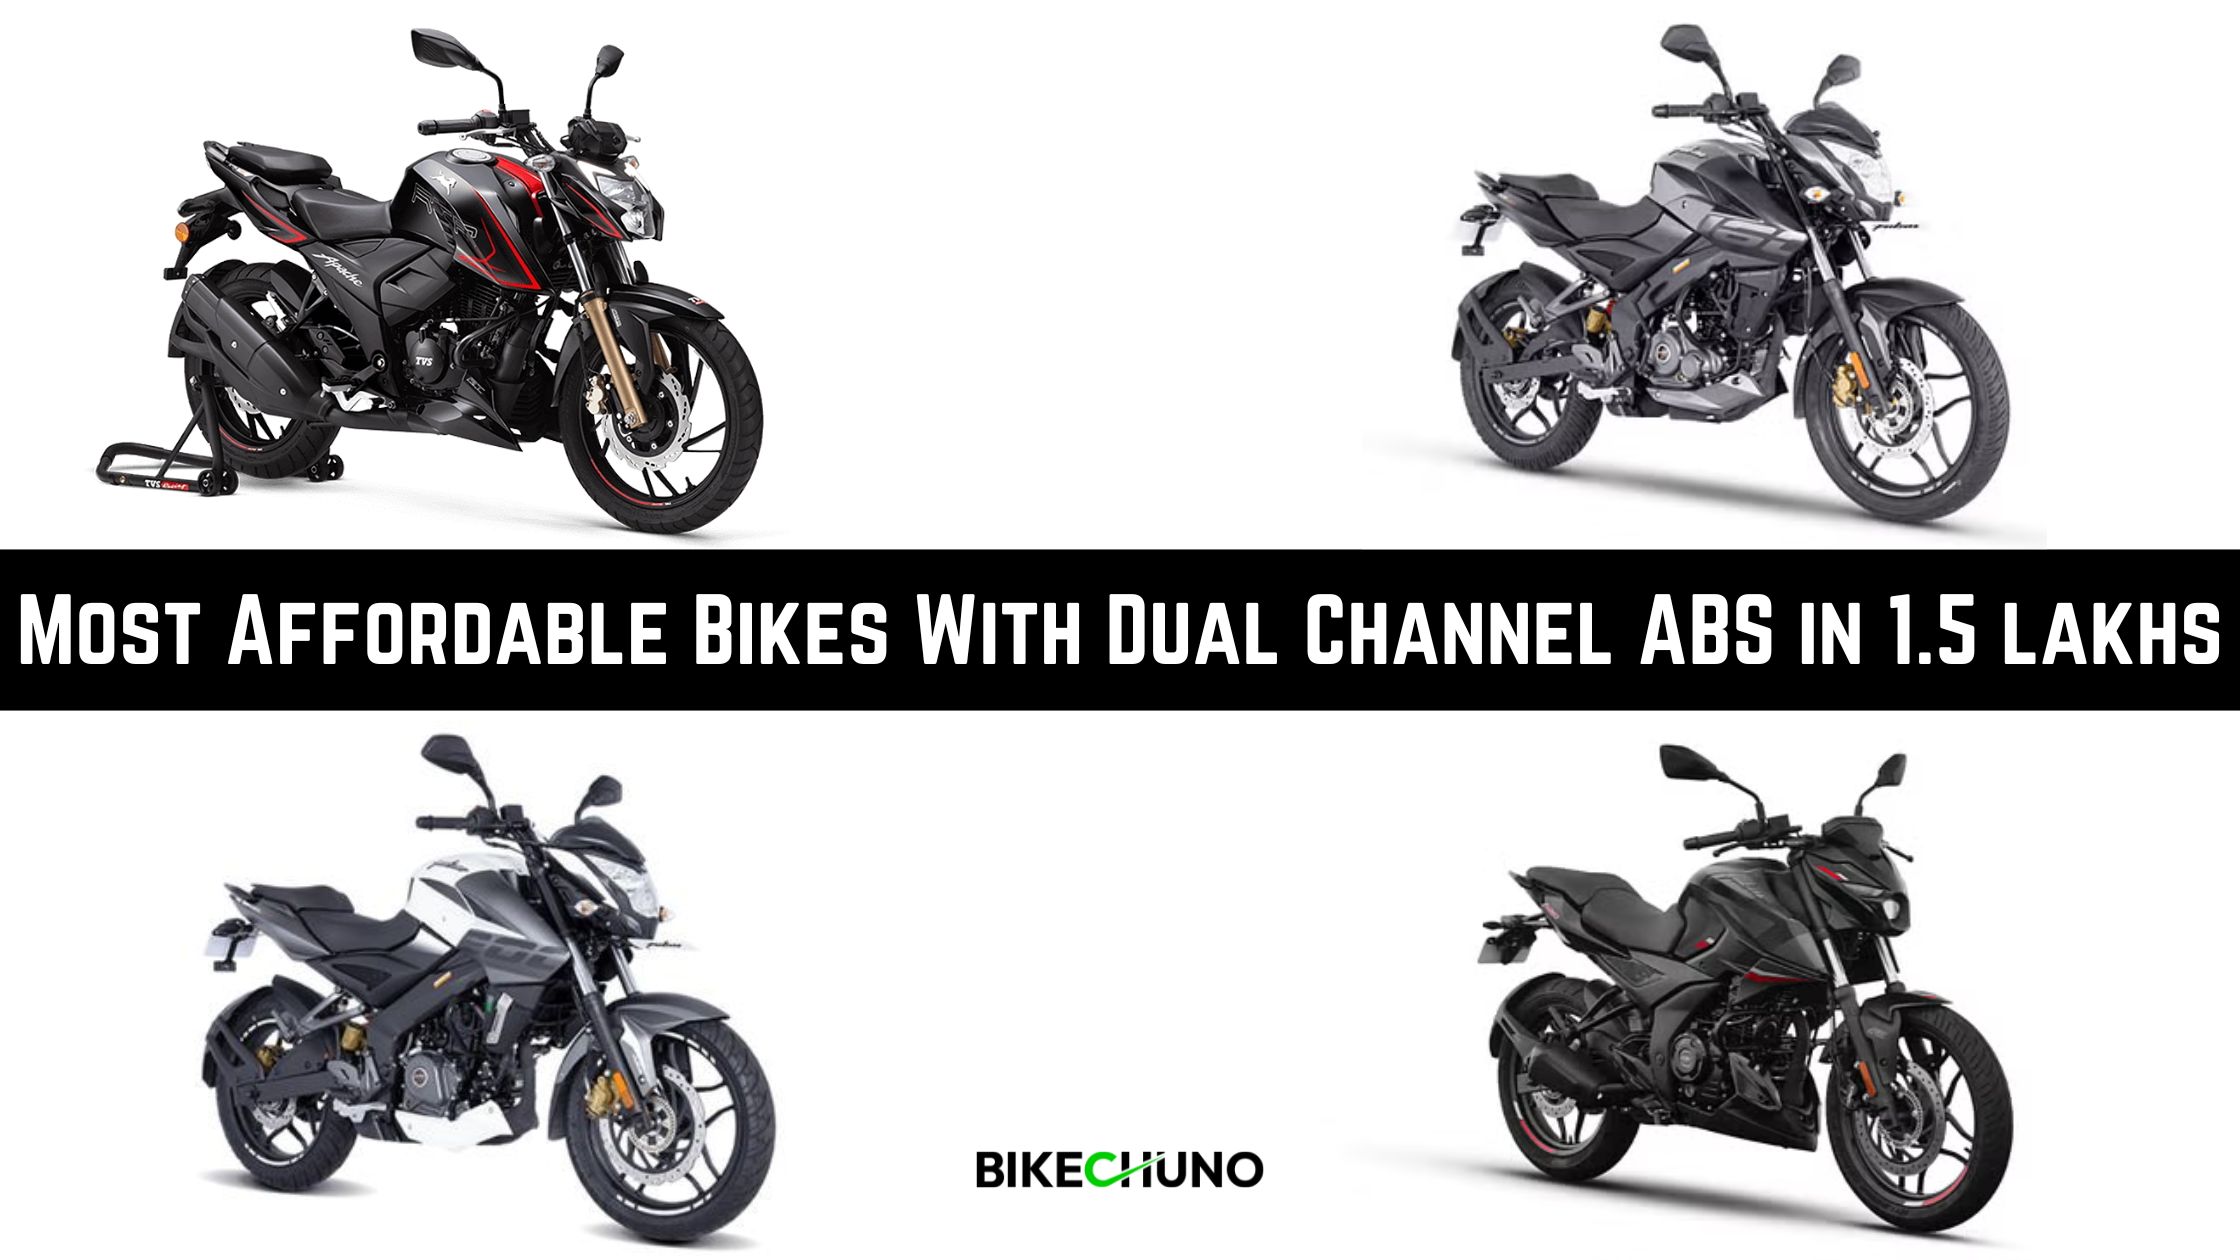 Most Affordable Bikes With Dual Channel ABS